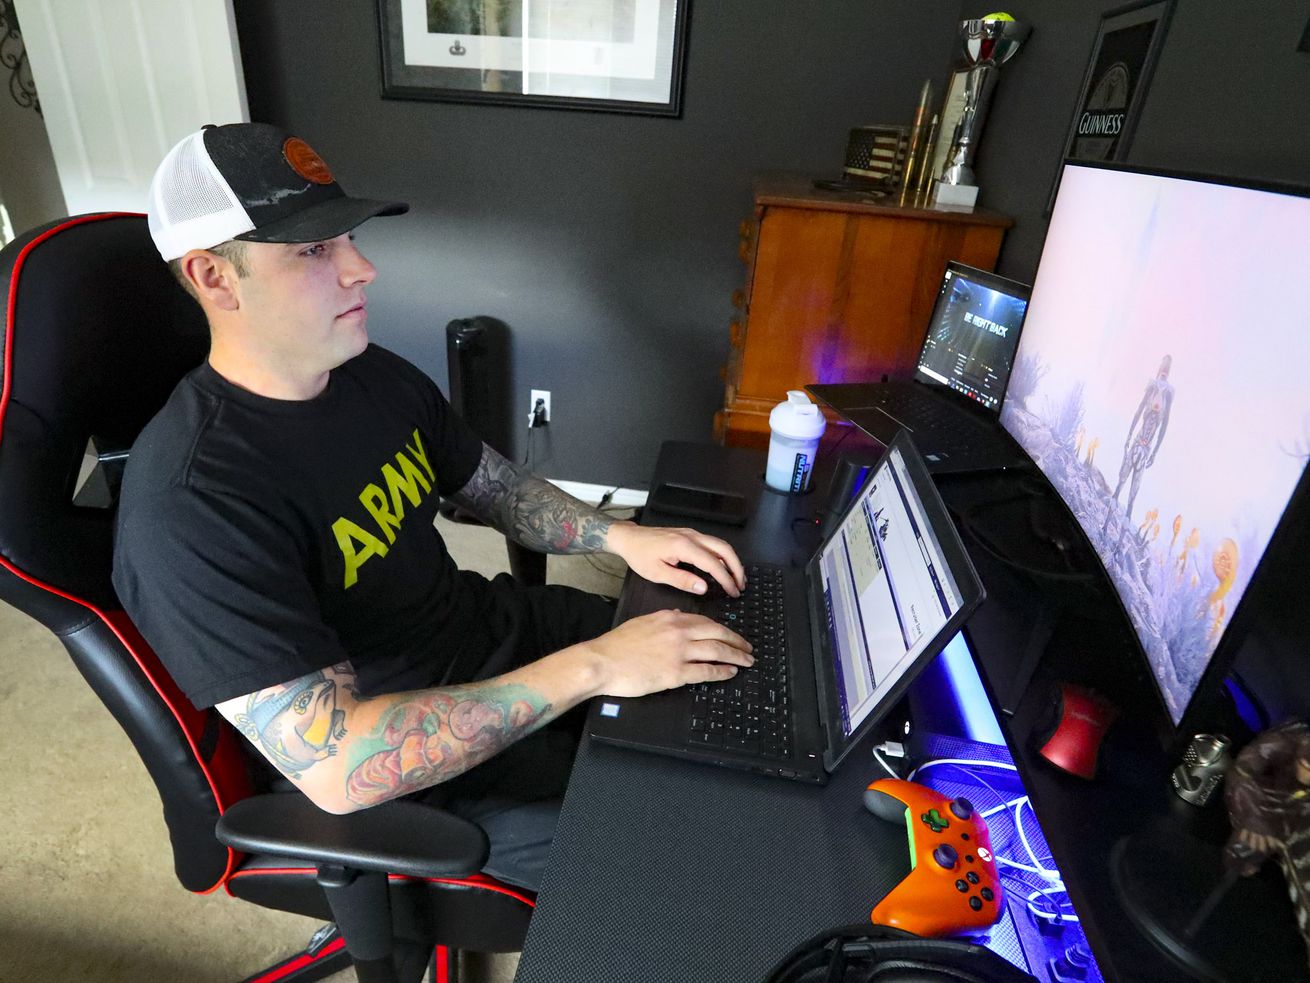 U.S. Army recruiter Staff Sgt. Garret Richard works on his laptop from his home in Pleasant Grove on Thursday, April 23, 2020.